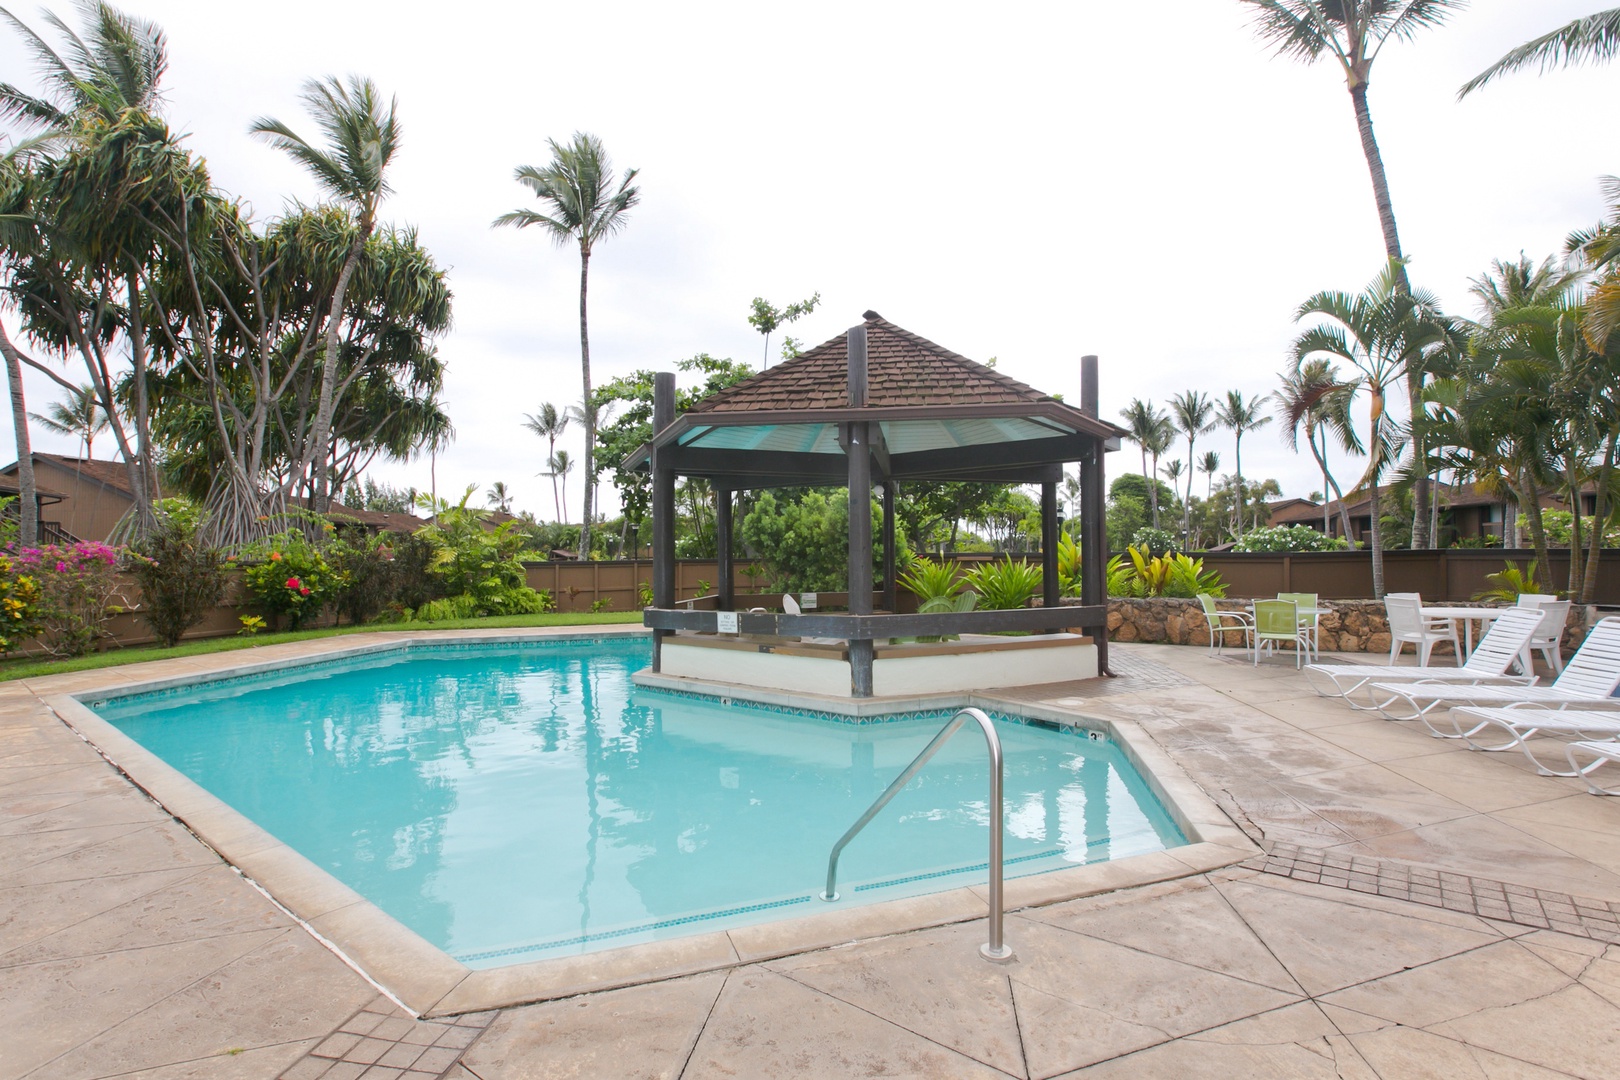 Kahuku Vacation Rentals, Ilima West Kuilima Estates #18 at Turtle Bay - Be welcomed in refreshing bliss at our inviting outdoor pool.